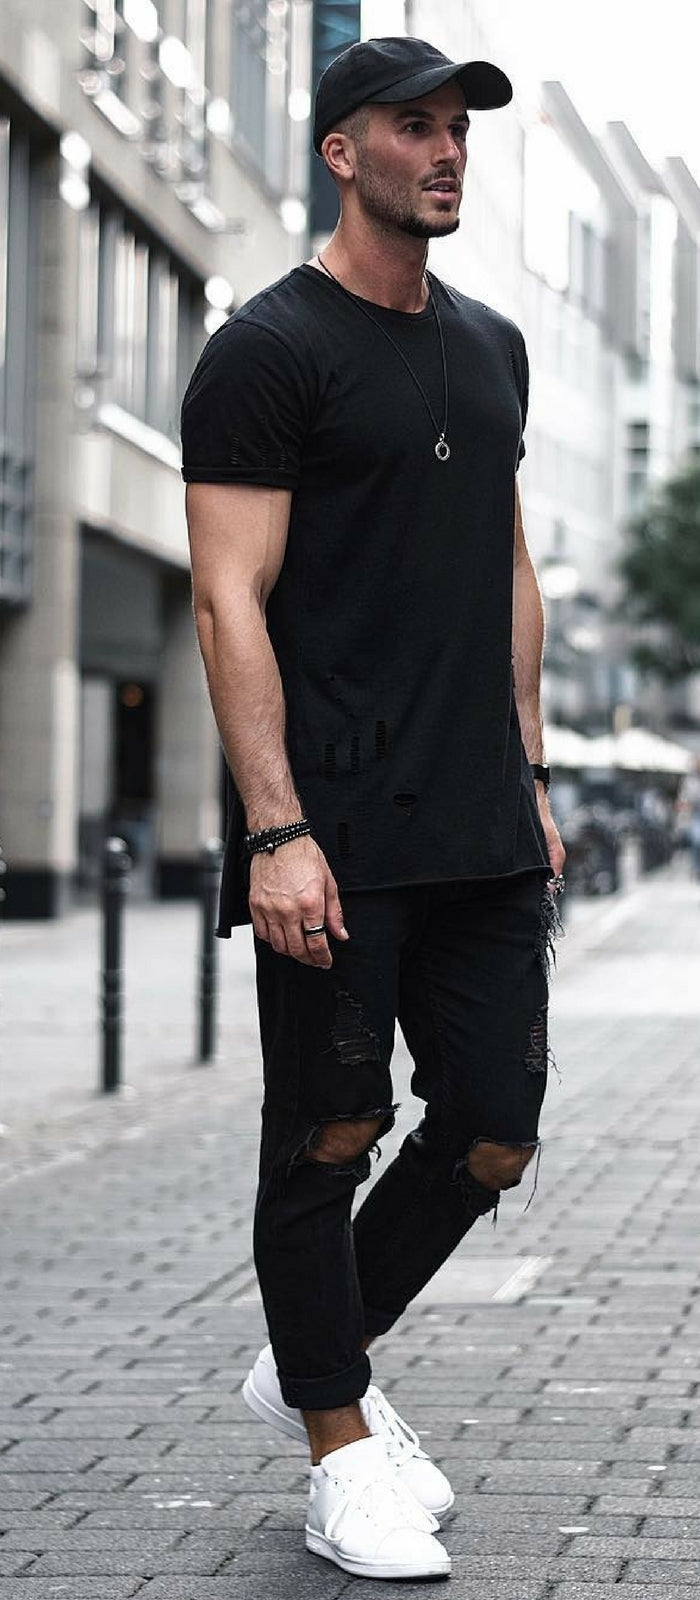 street style fashion for guys Casual street style looks for men ...